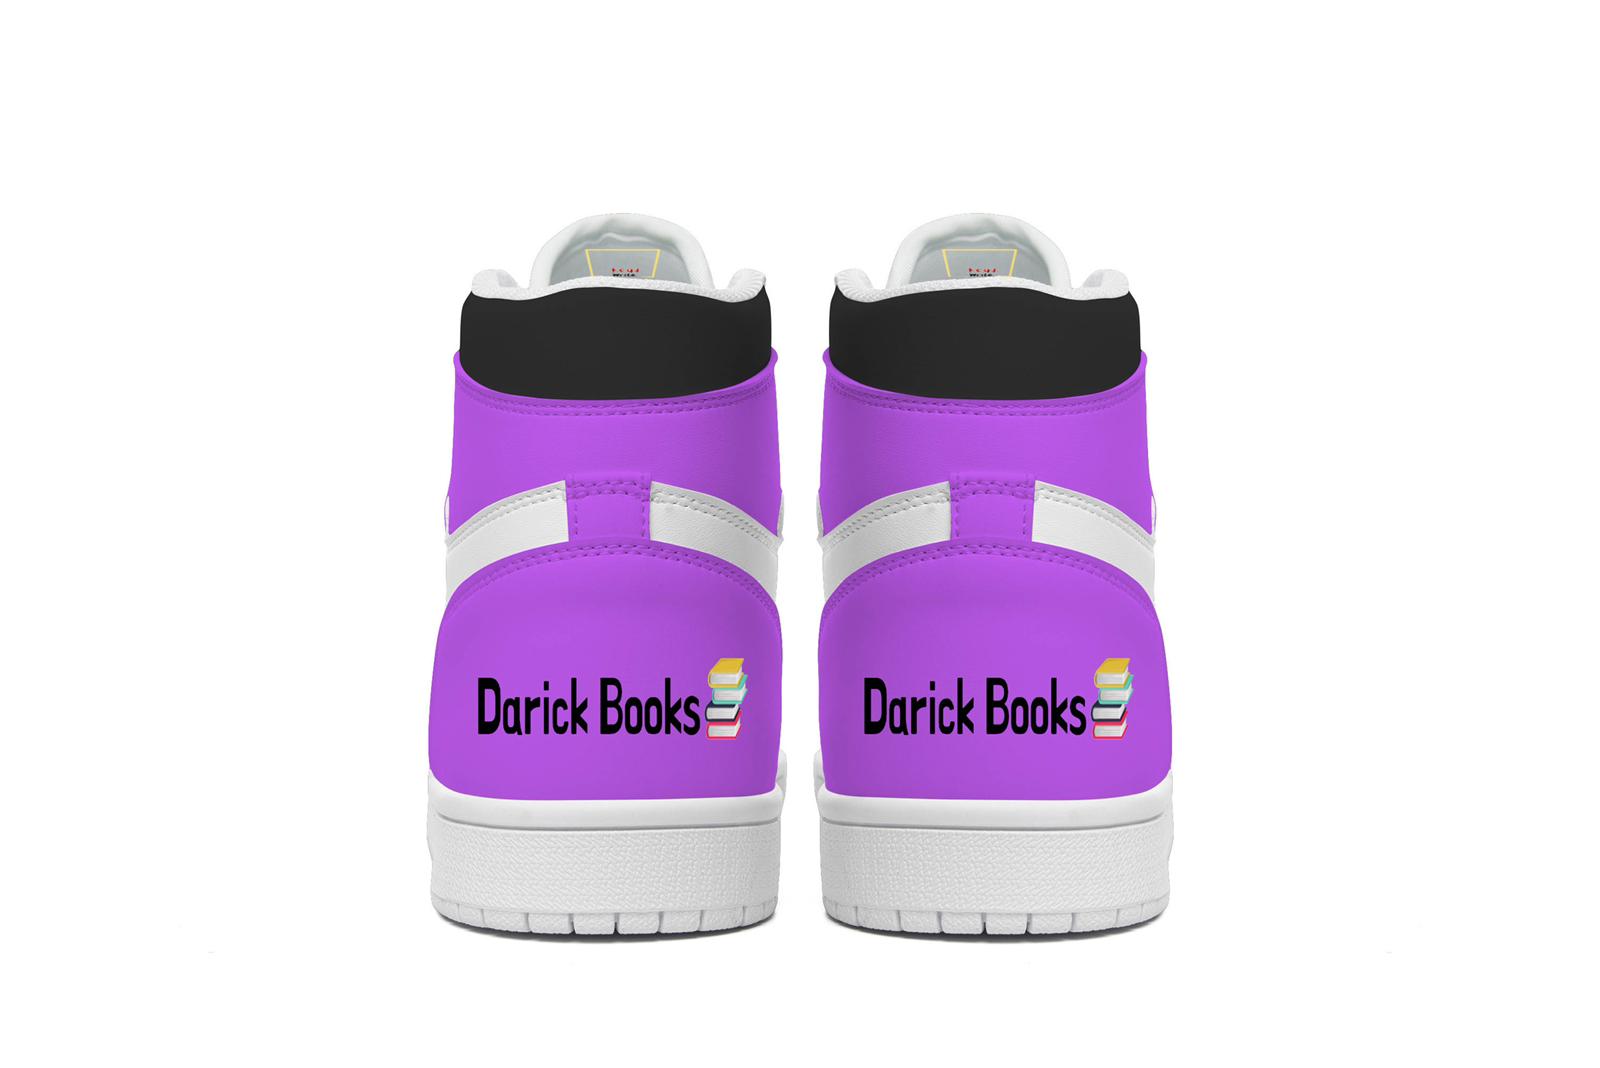 Bookworm Shoes (Bookworm Limited Edition Sneaker 1)